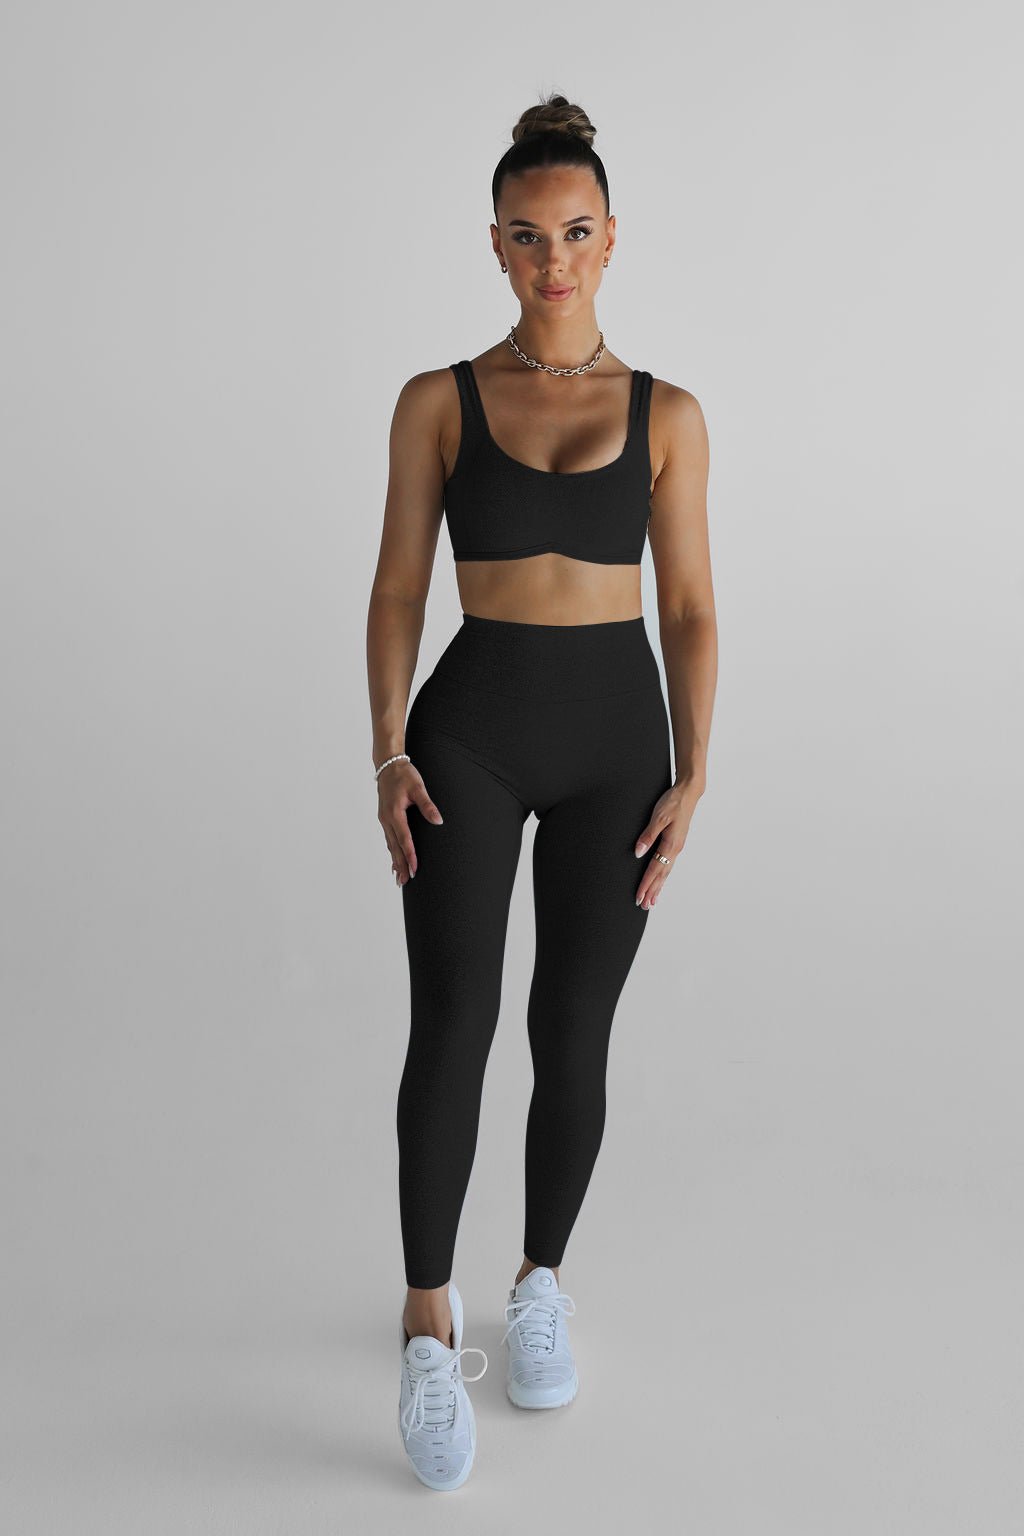 Black Workout Leggings Outfit Higher Waisted Women Pants 25 Inch Inseam  Leggings Sport Fitness Buttery Soft Gym Exercise For From Mucho, $23.28